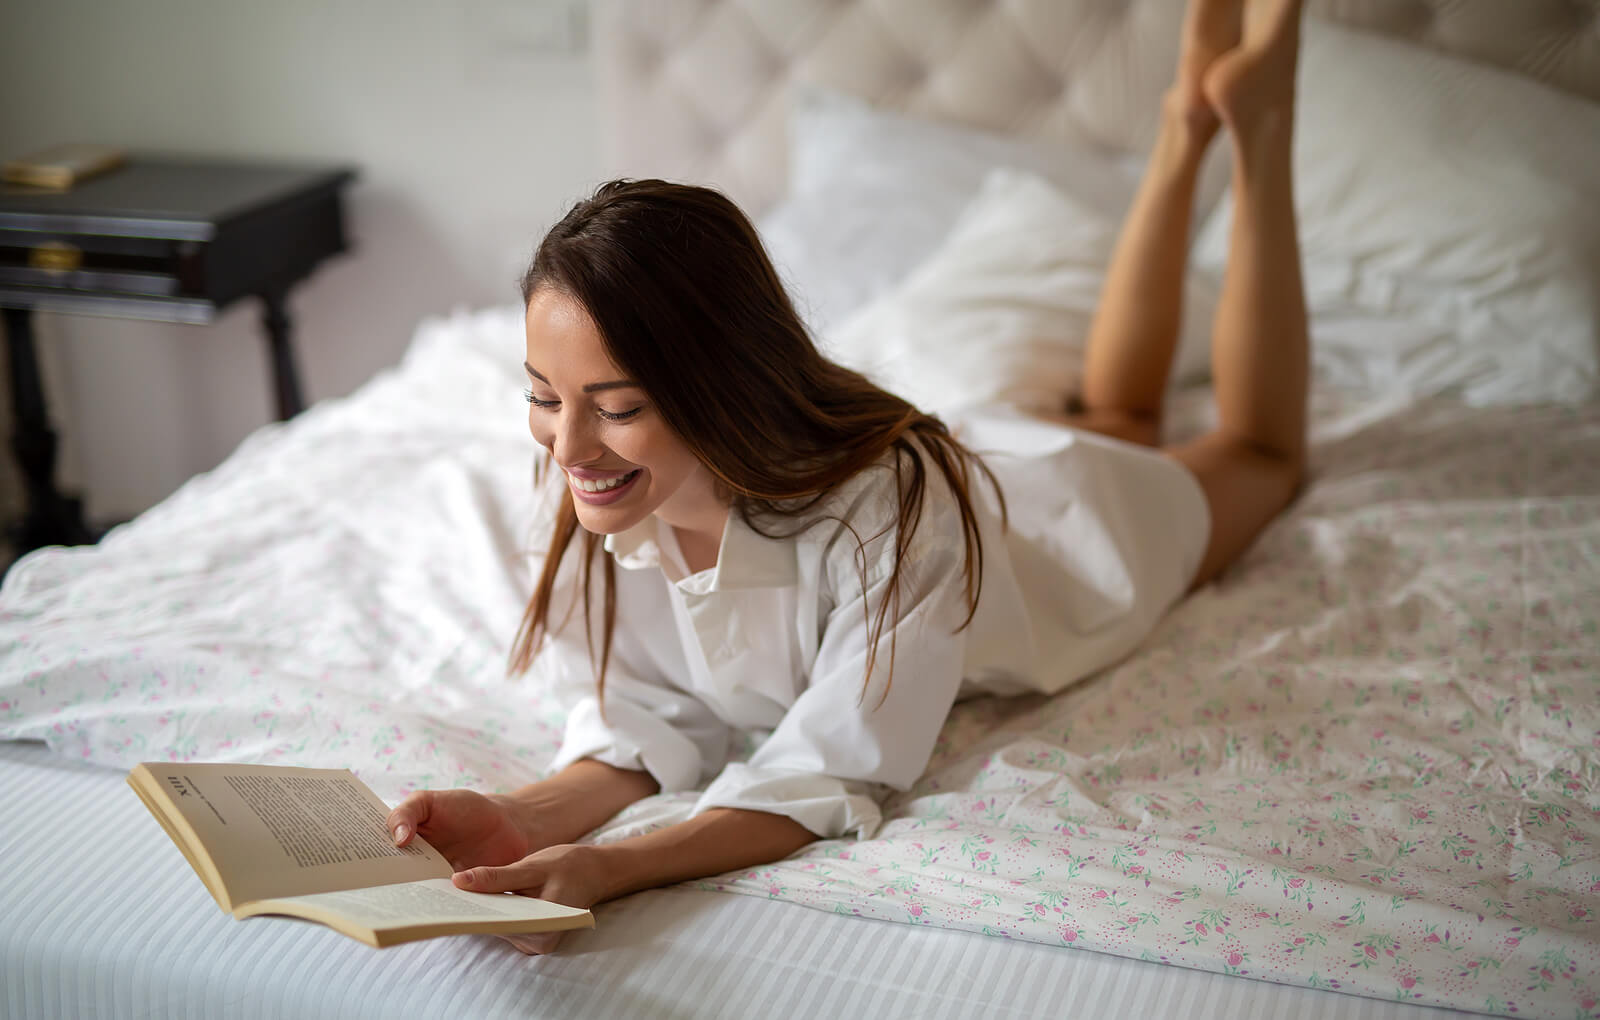 Female introverted housemate reading on bed